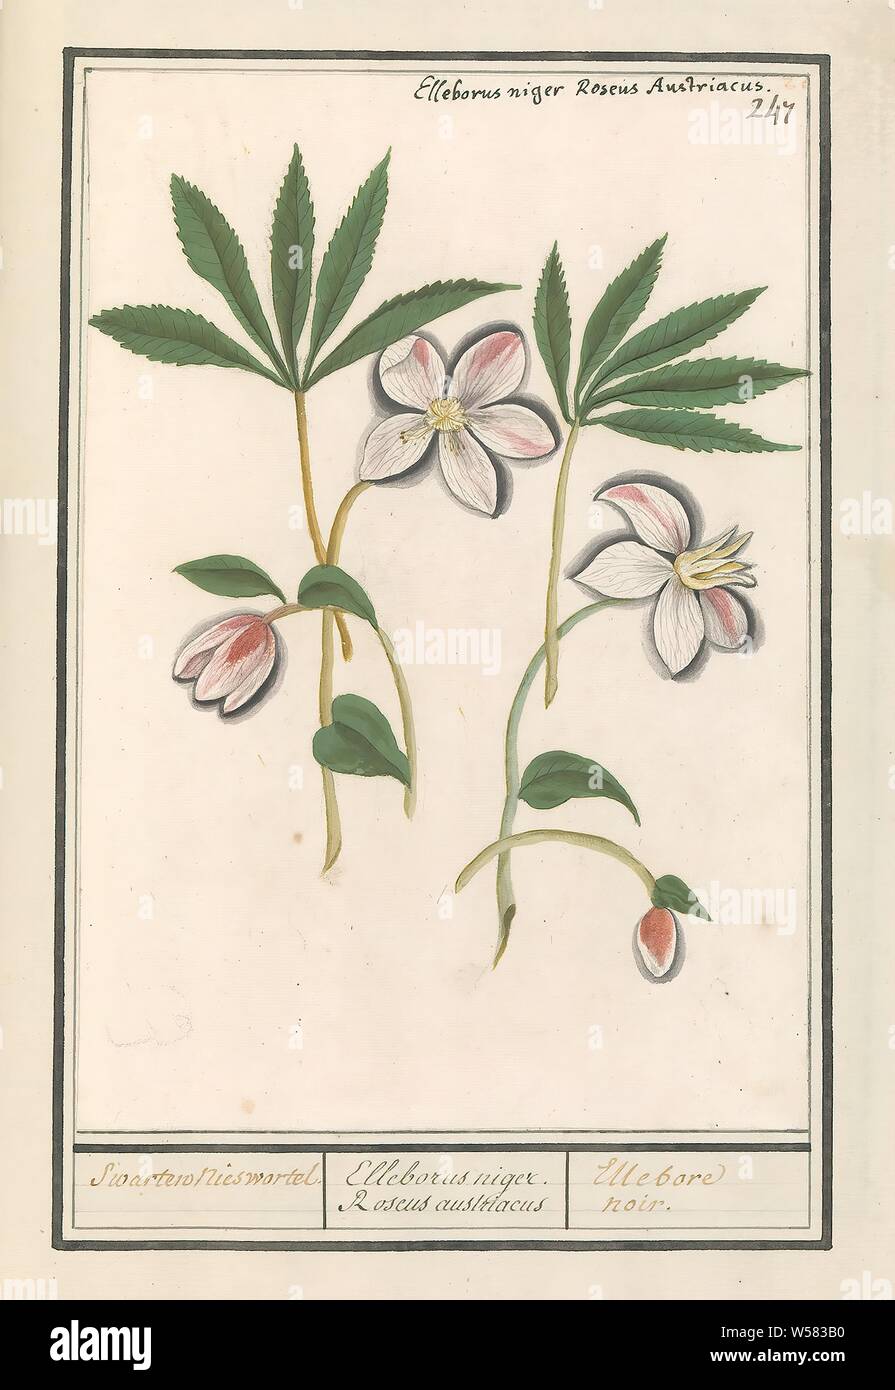 Christmas rose (Helleborus niger) Swarten sneeze root. / Elleborus niger. Roseus austriacus / Ellebore noir. (title on object), Christmas rose (Helleborus). Numbered top right: 247. Top left the Latin name. Part of the third album with drawings of flowers and plants. Tenth of twelve albums with drawings of animals, birds and plants known around 1600, commissioned by Emperor Rudolf II. With explanation in Dutch, Latin and French., Anselmus Boetius de Boodt, 1596 - 1610, paper, watercolor (paint), deck paint, chalk, ink, pen, h 247 mm × w 172 mm Stock Photo